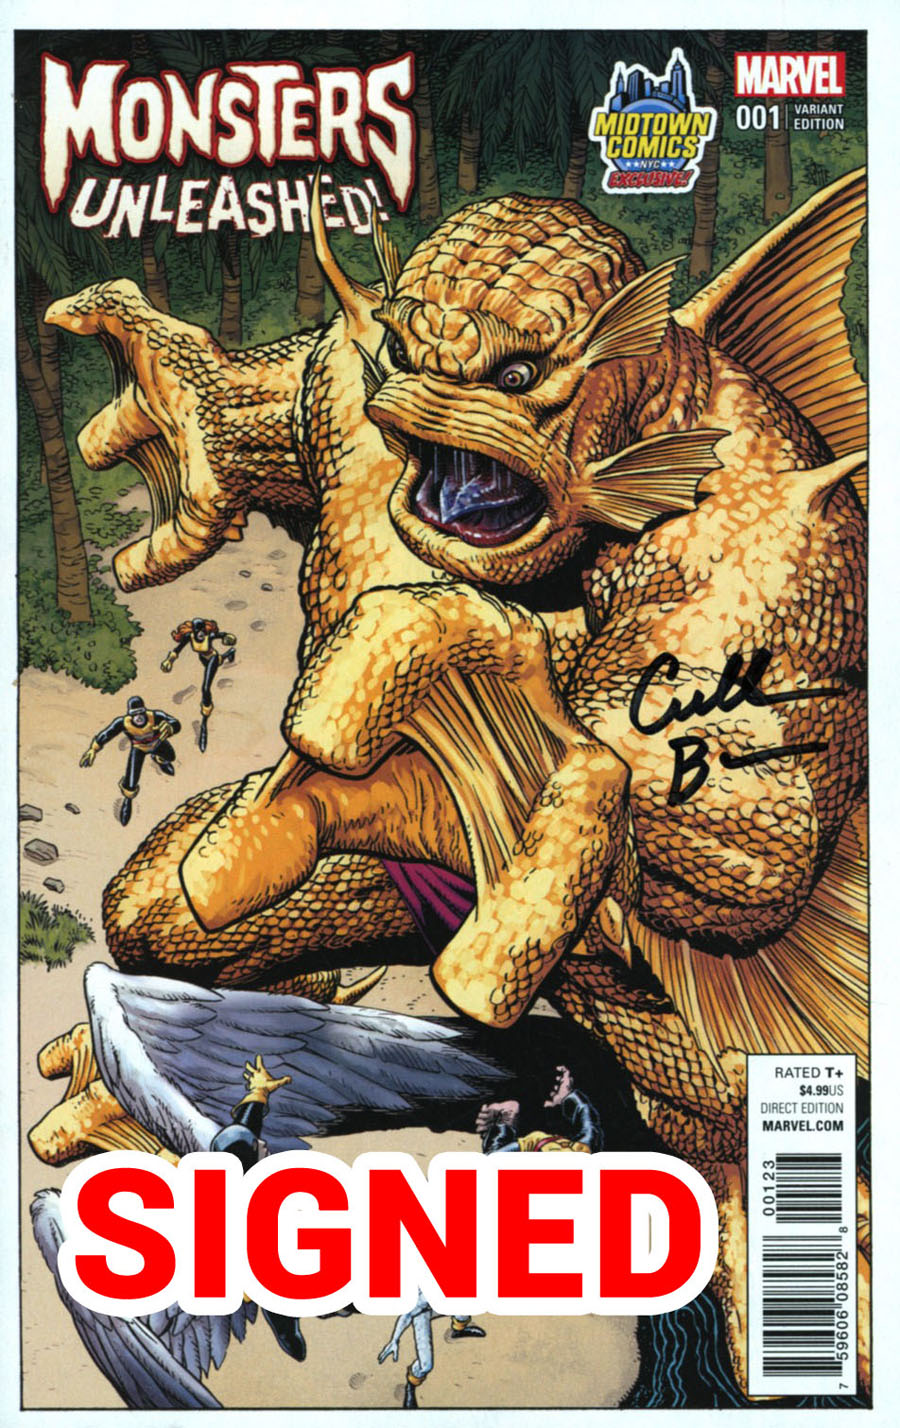 Monsters Unleashed #1 Cover N Midtown Exclusive Arthur Adams Variant Cover Signed By Cullen Bunn